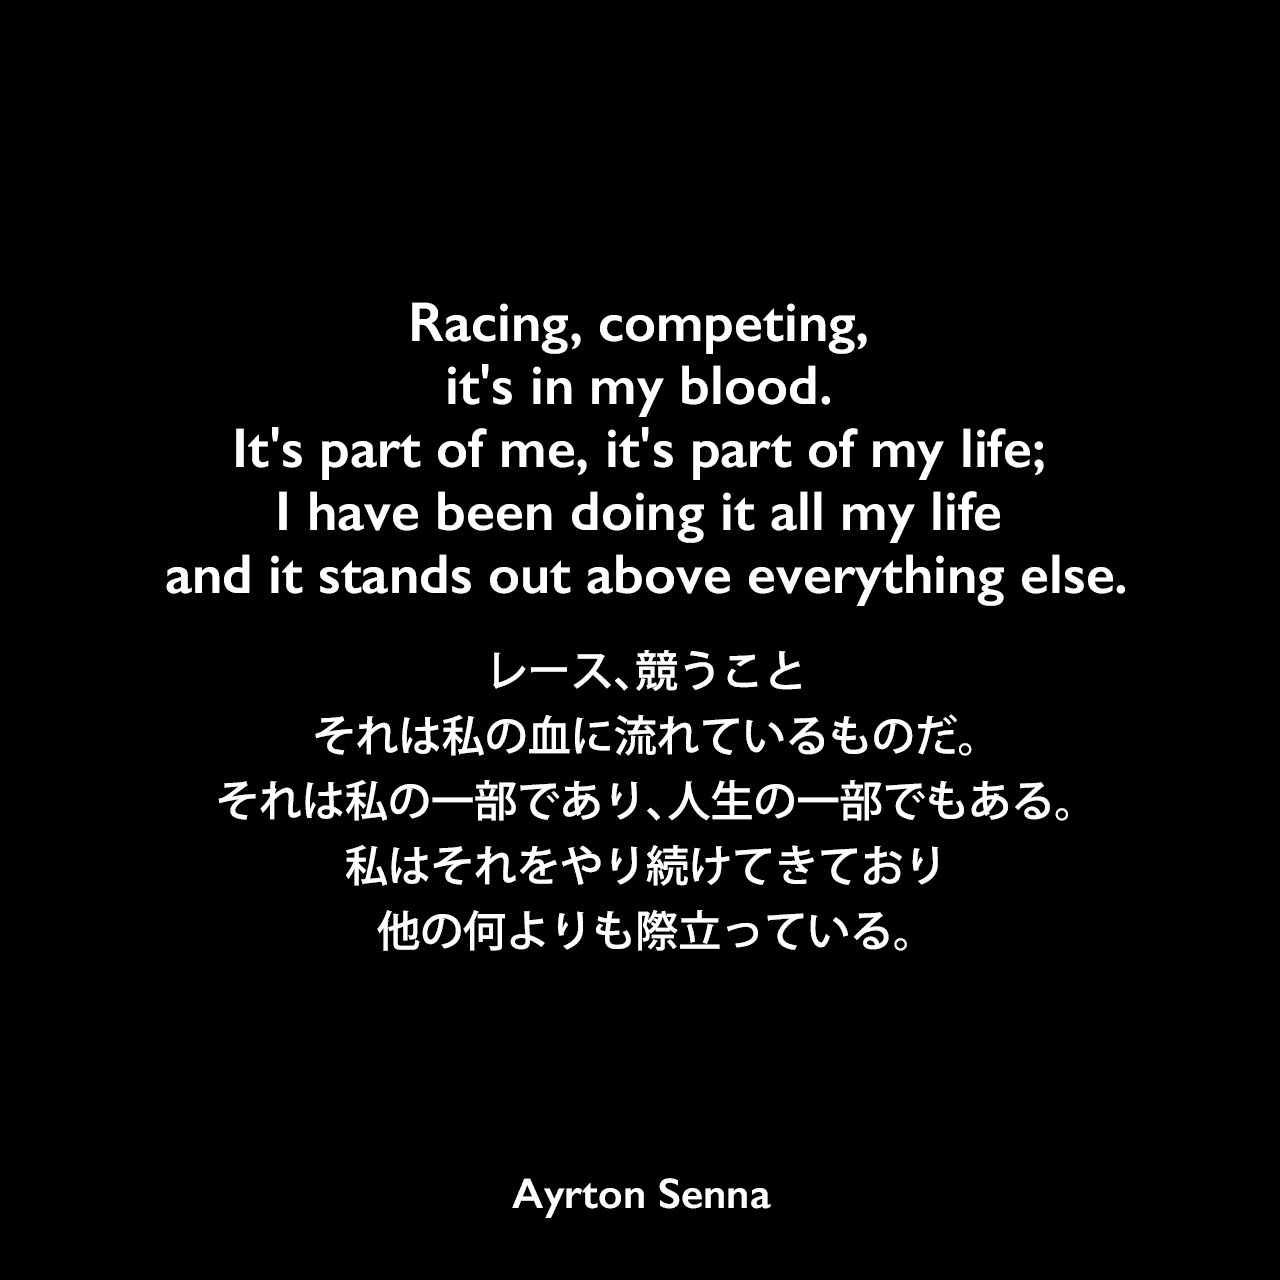 Racing, competing, it's in my blood. It's part of me, it's part of my life; I have been doing it all my life and it stands out above everything else.レース、競うこと、それは私の血に流れているものだ。それは私の一部であり、人生の一部でもある。私はそれをやり続けてきており、他の何よりも際立っている。Ayrton Senna